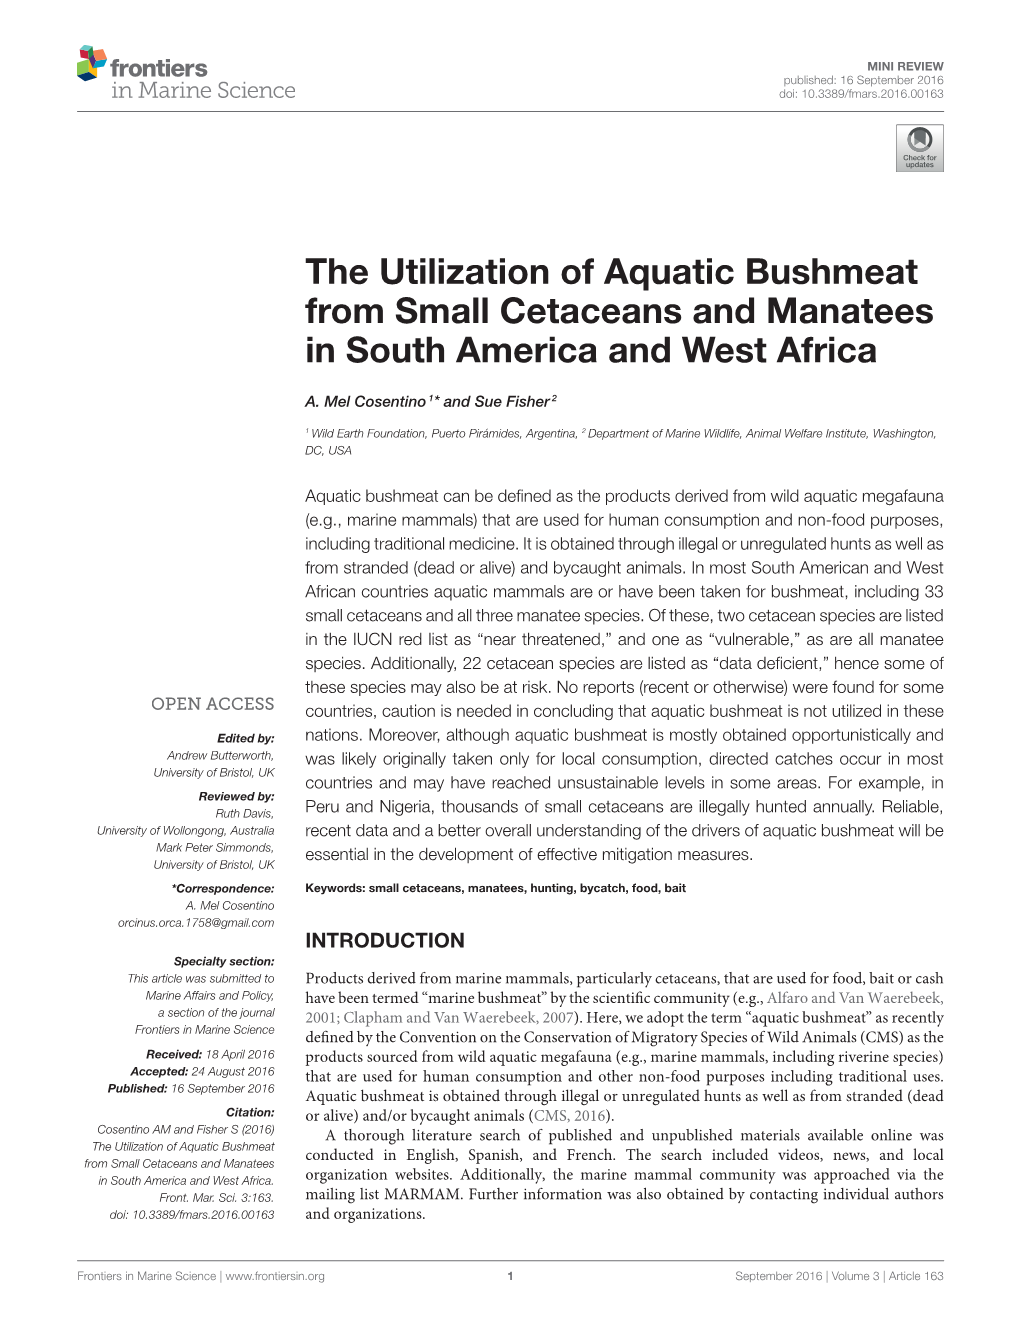 The Utilization of Aquatic Bushmeat from Small Cetaceans and Manatees in South America and West Africa